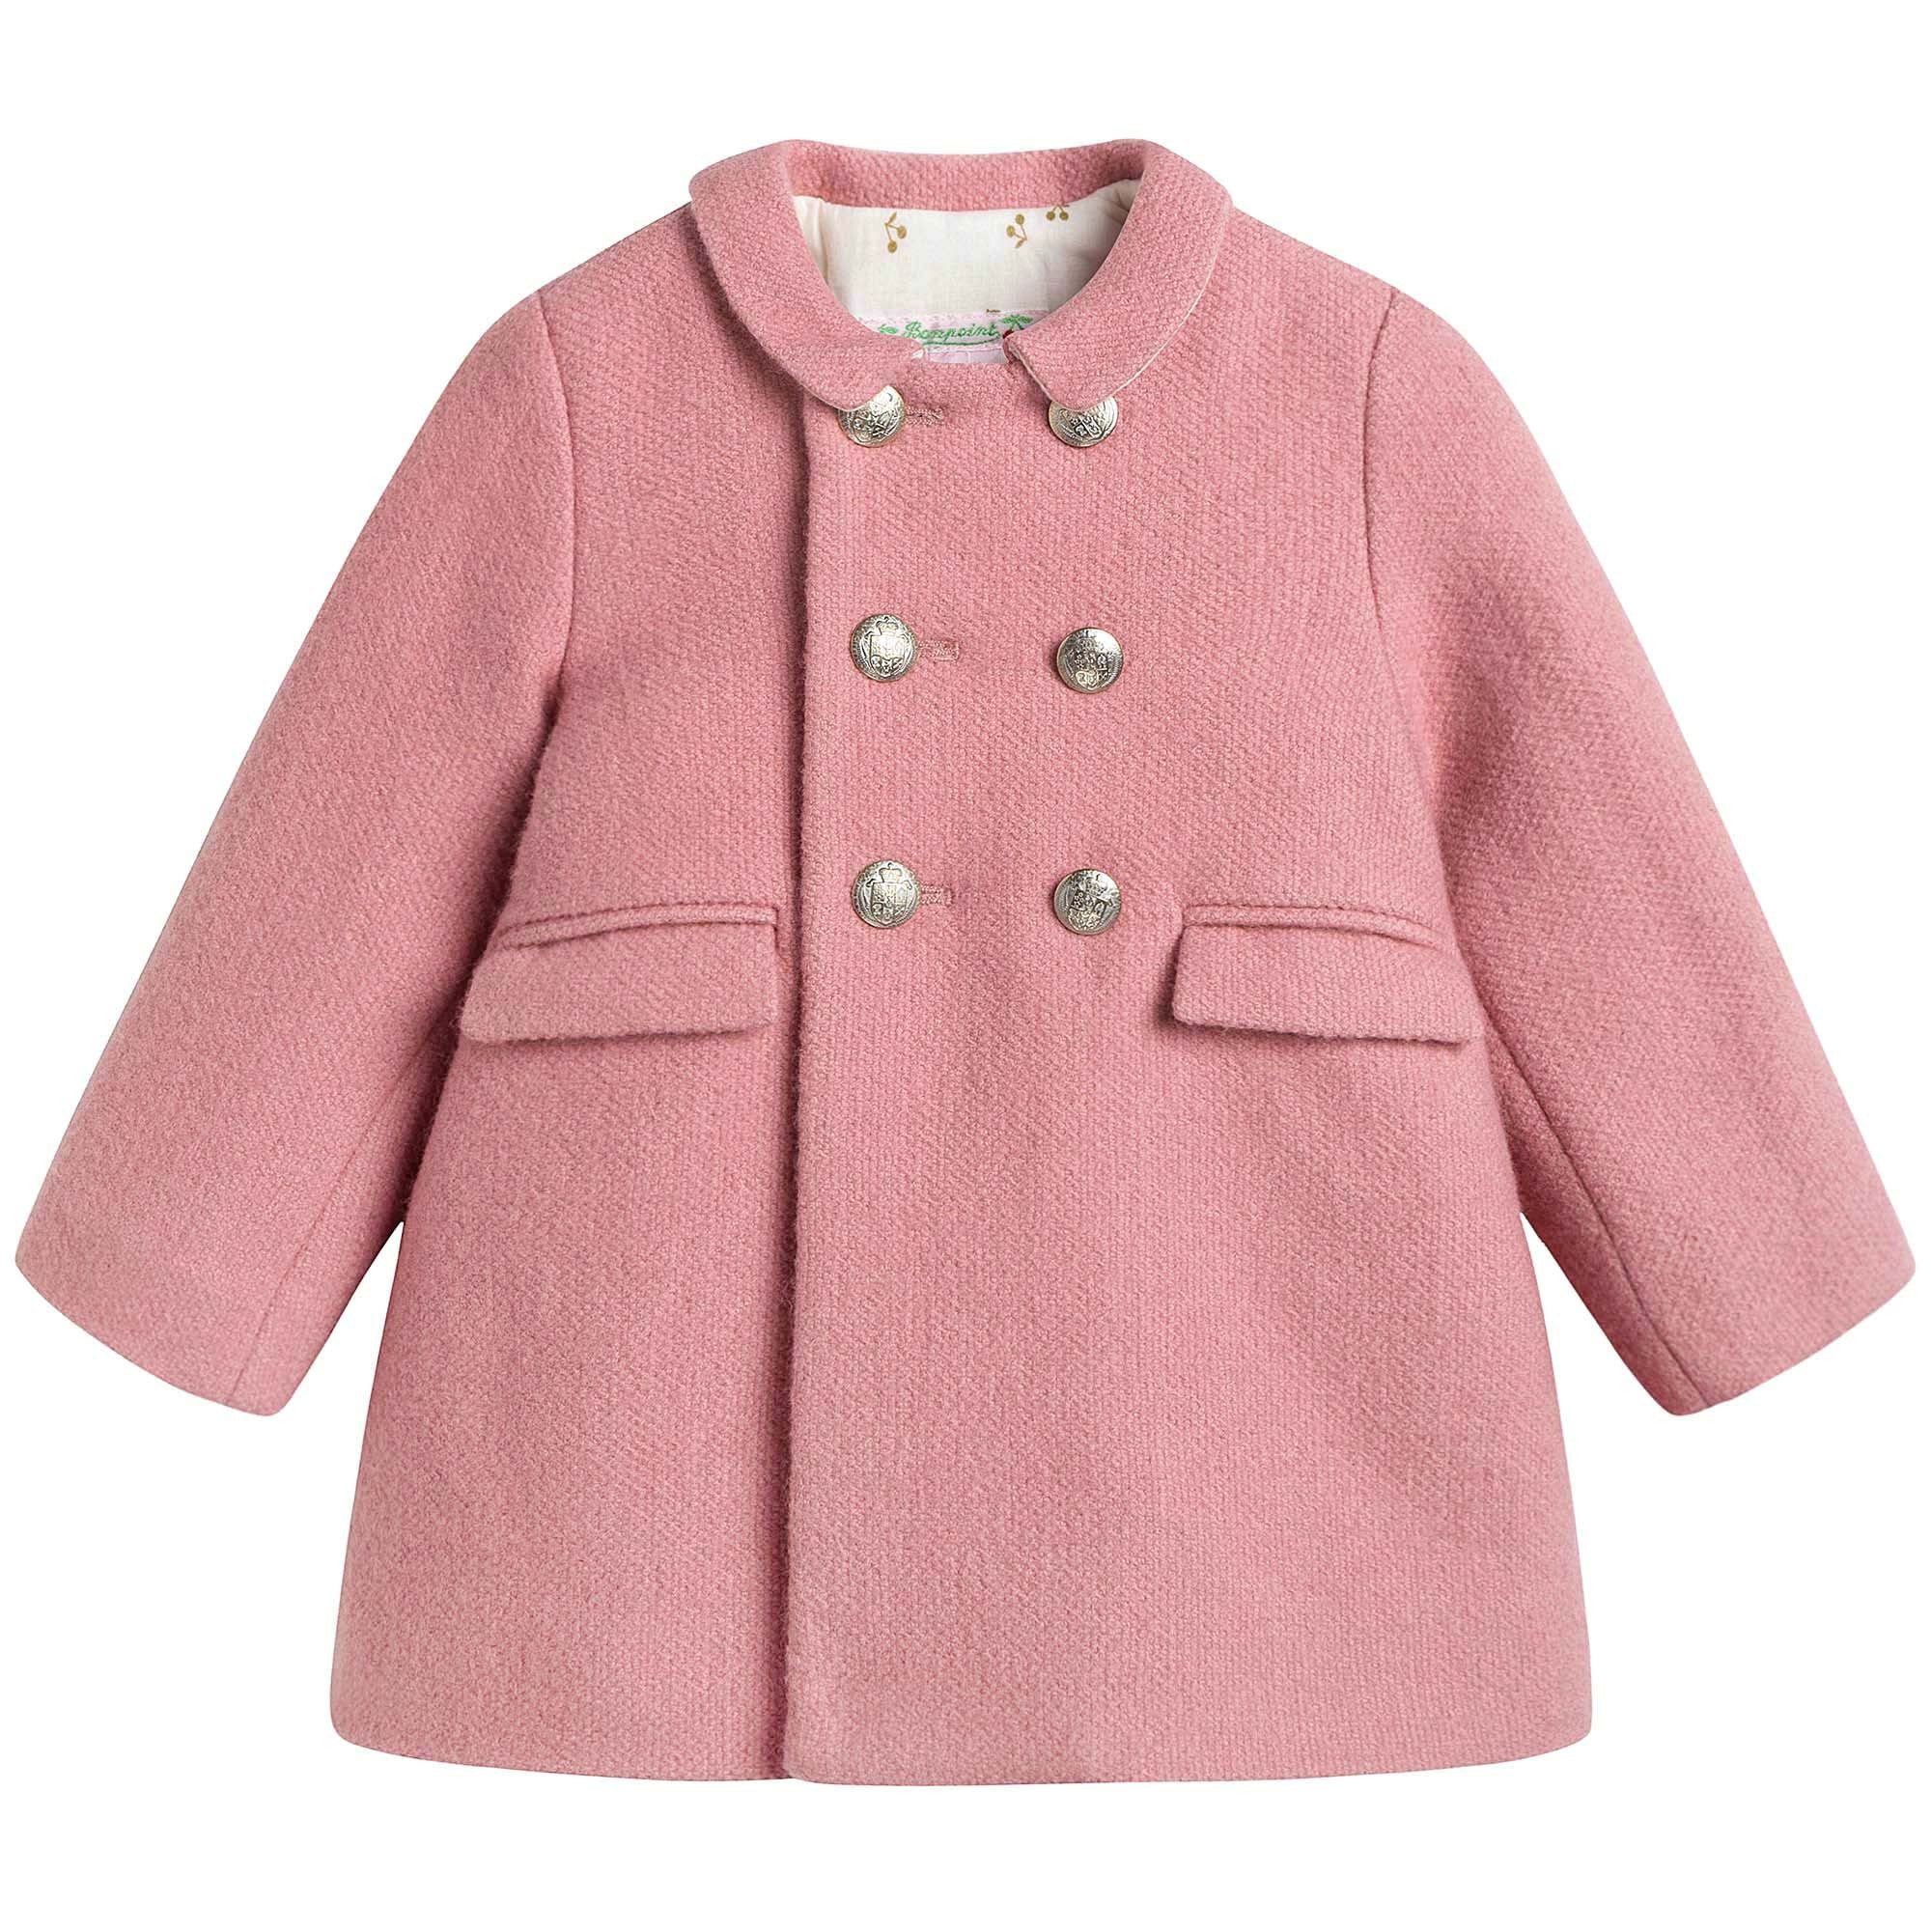 Baby Girls Pink With Gold Bottons Coat - CÉMAROSE | Children's Fashion Store - 1